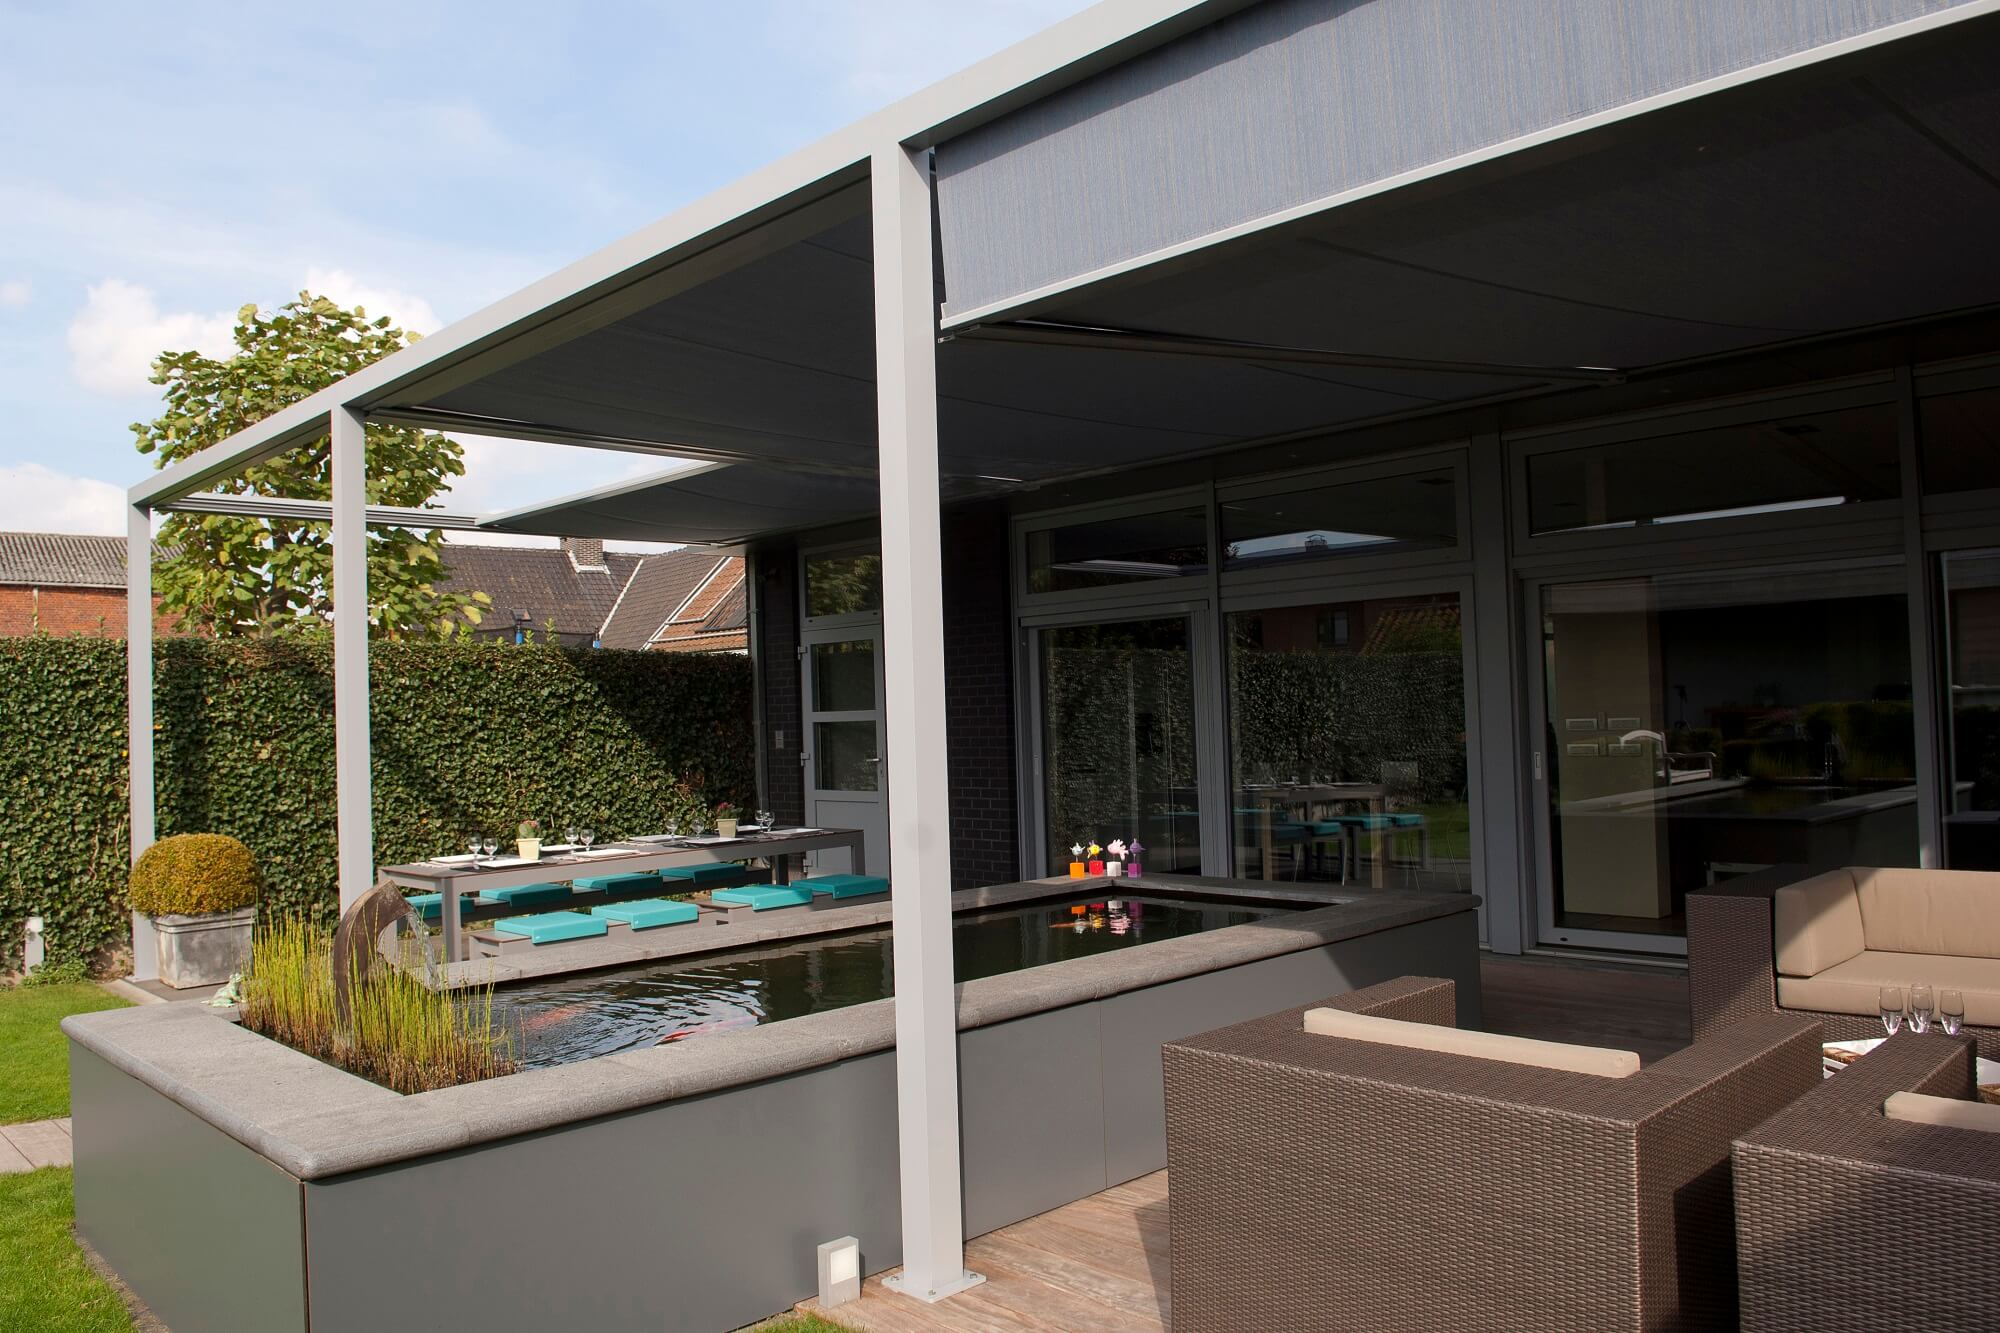 Retractable residential deck pergola cover system